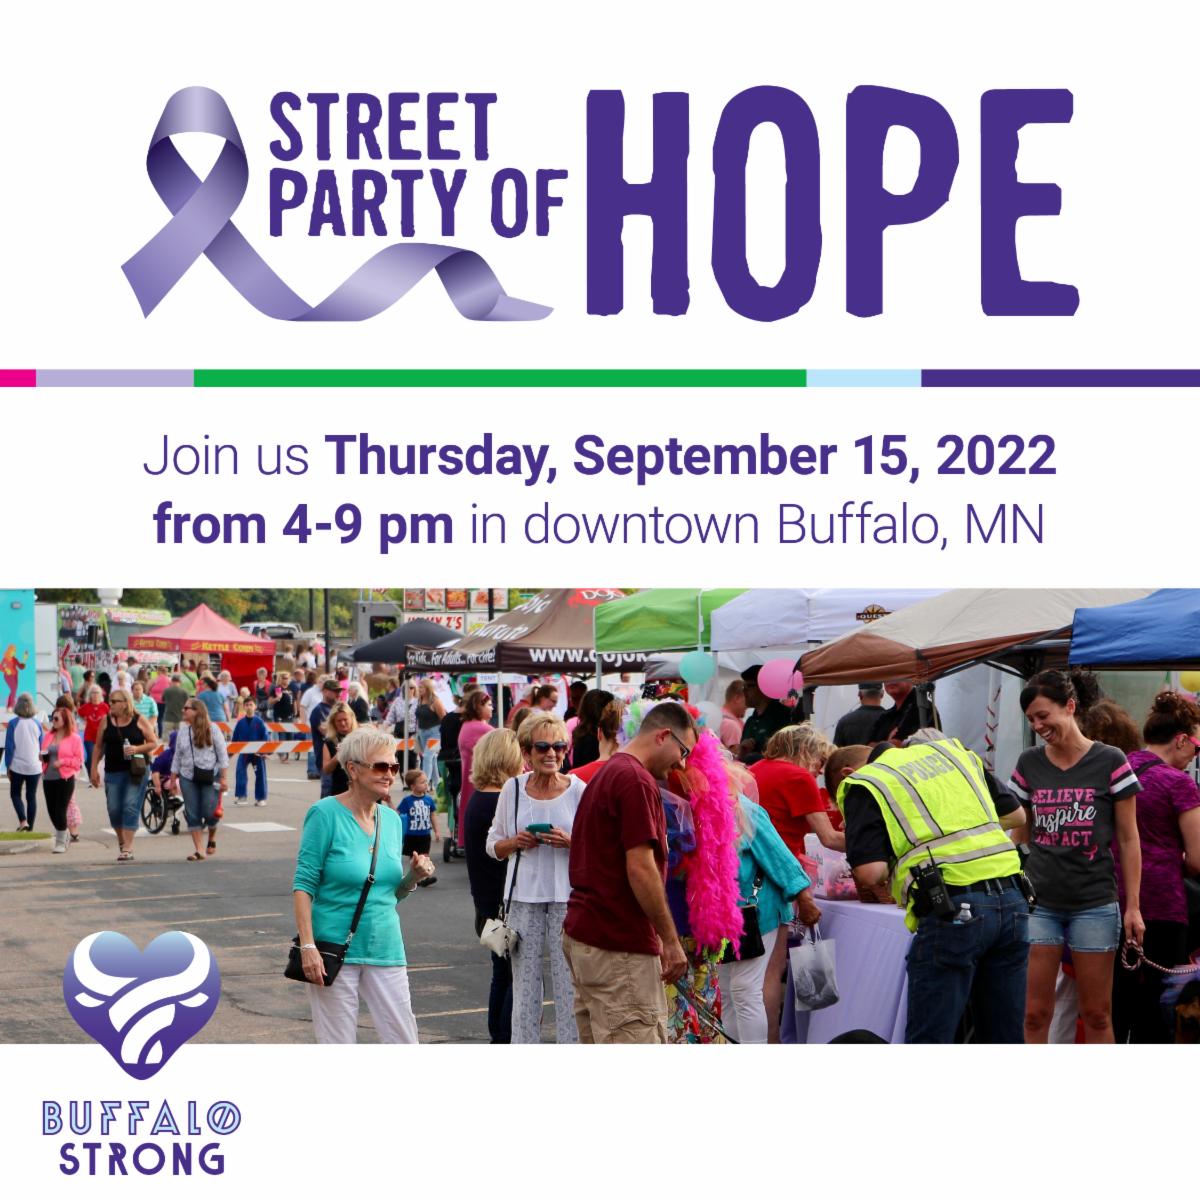 Street Party of Hope